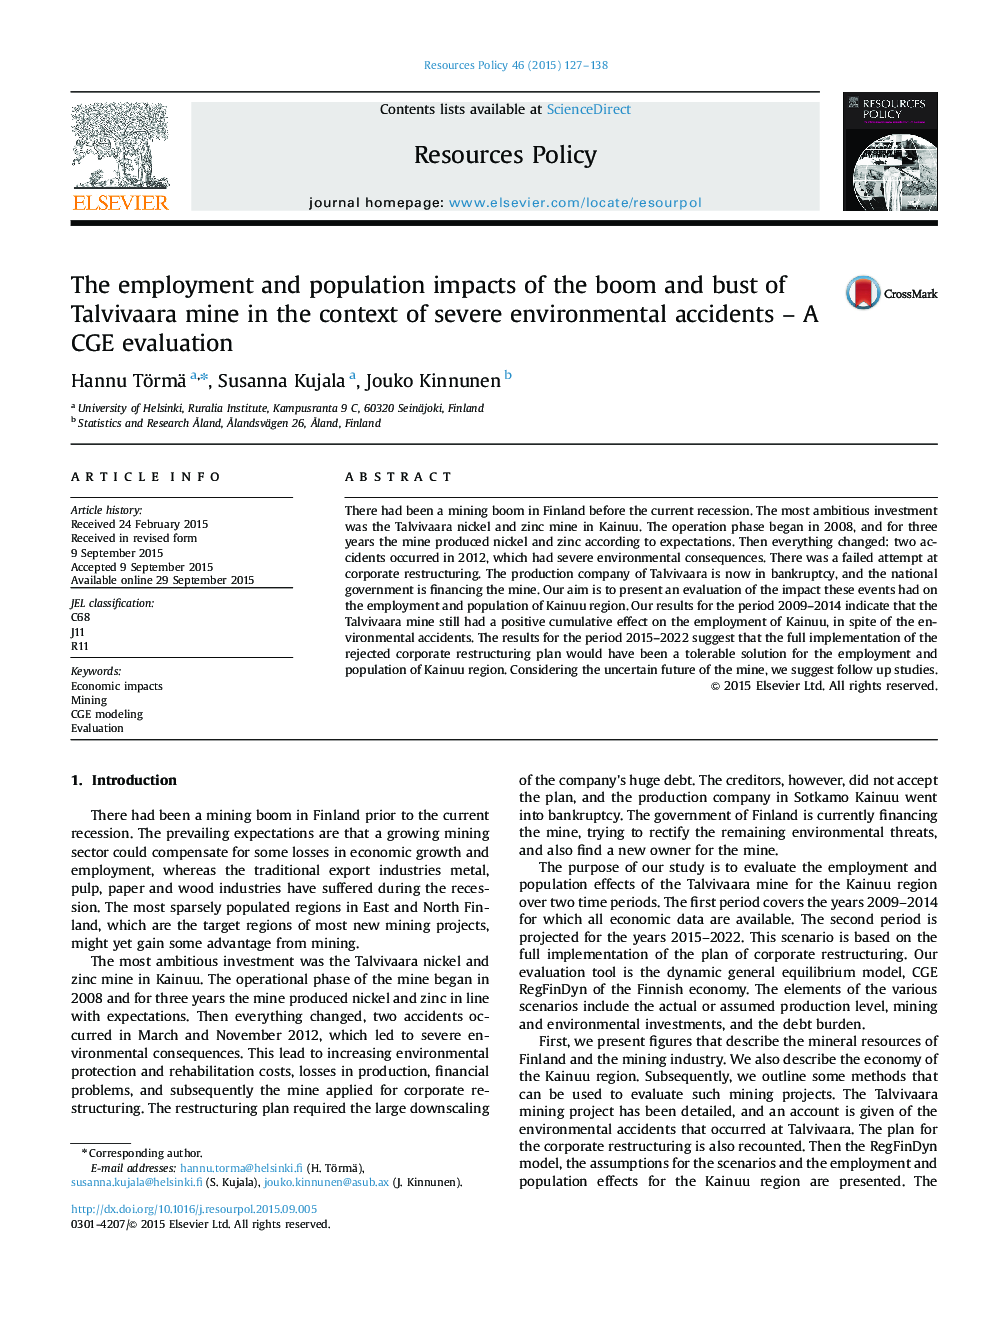 The employment and population impacts of the boom and bust of Talvivaara mine in the context of severe environmental accidents - A CGE evaluation